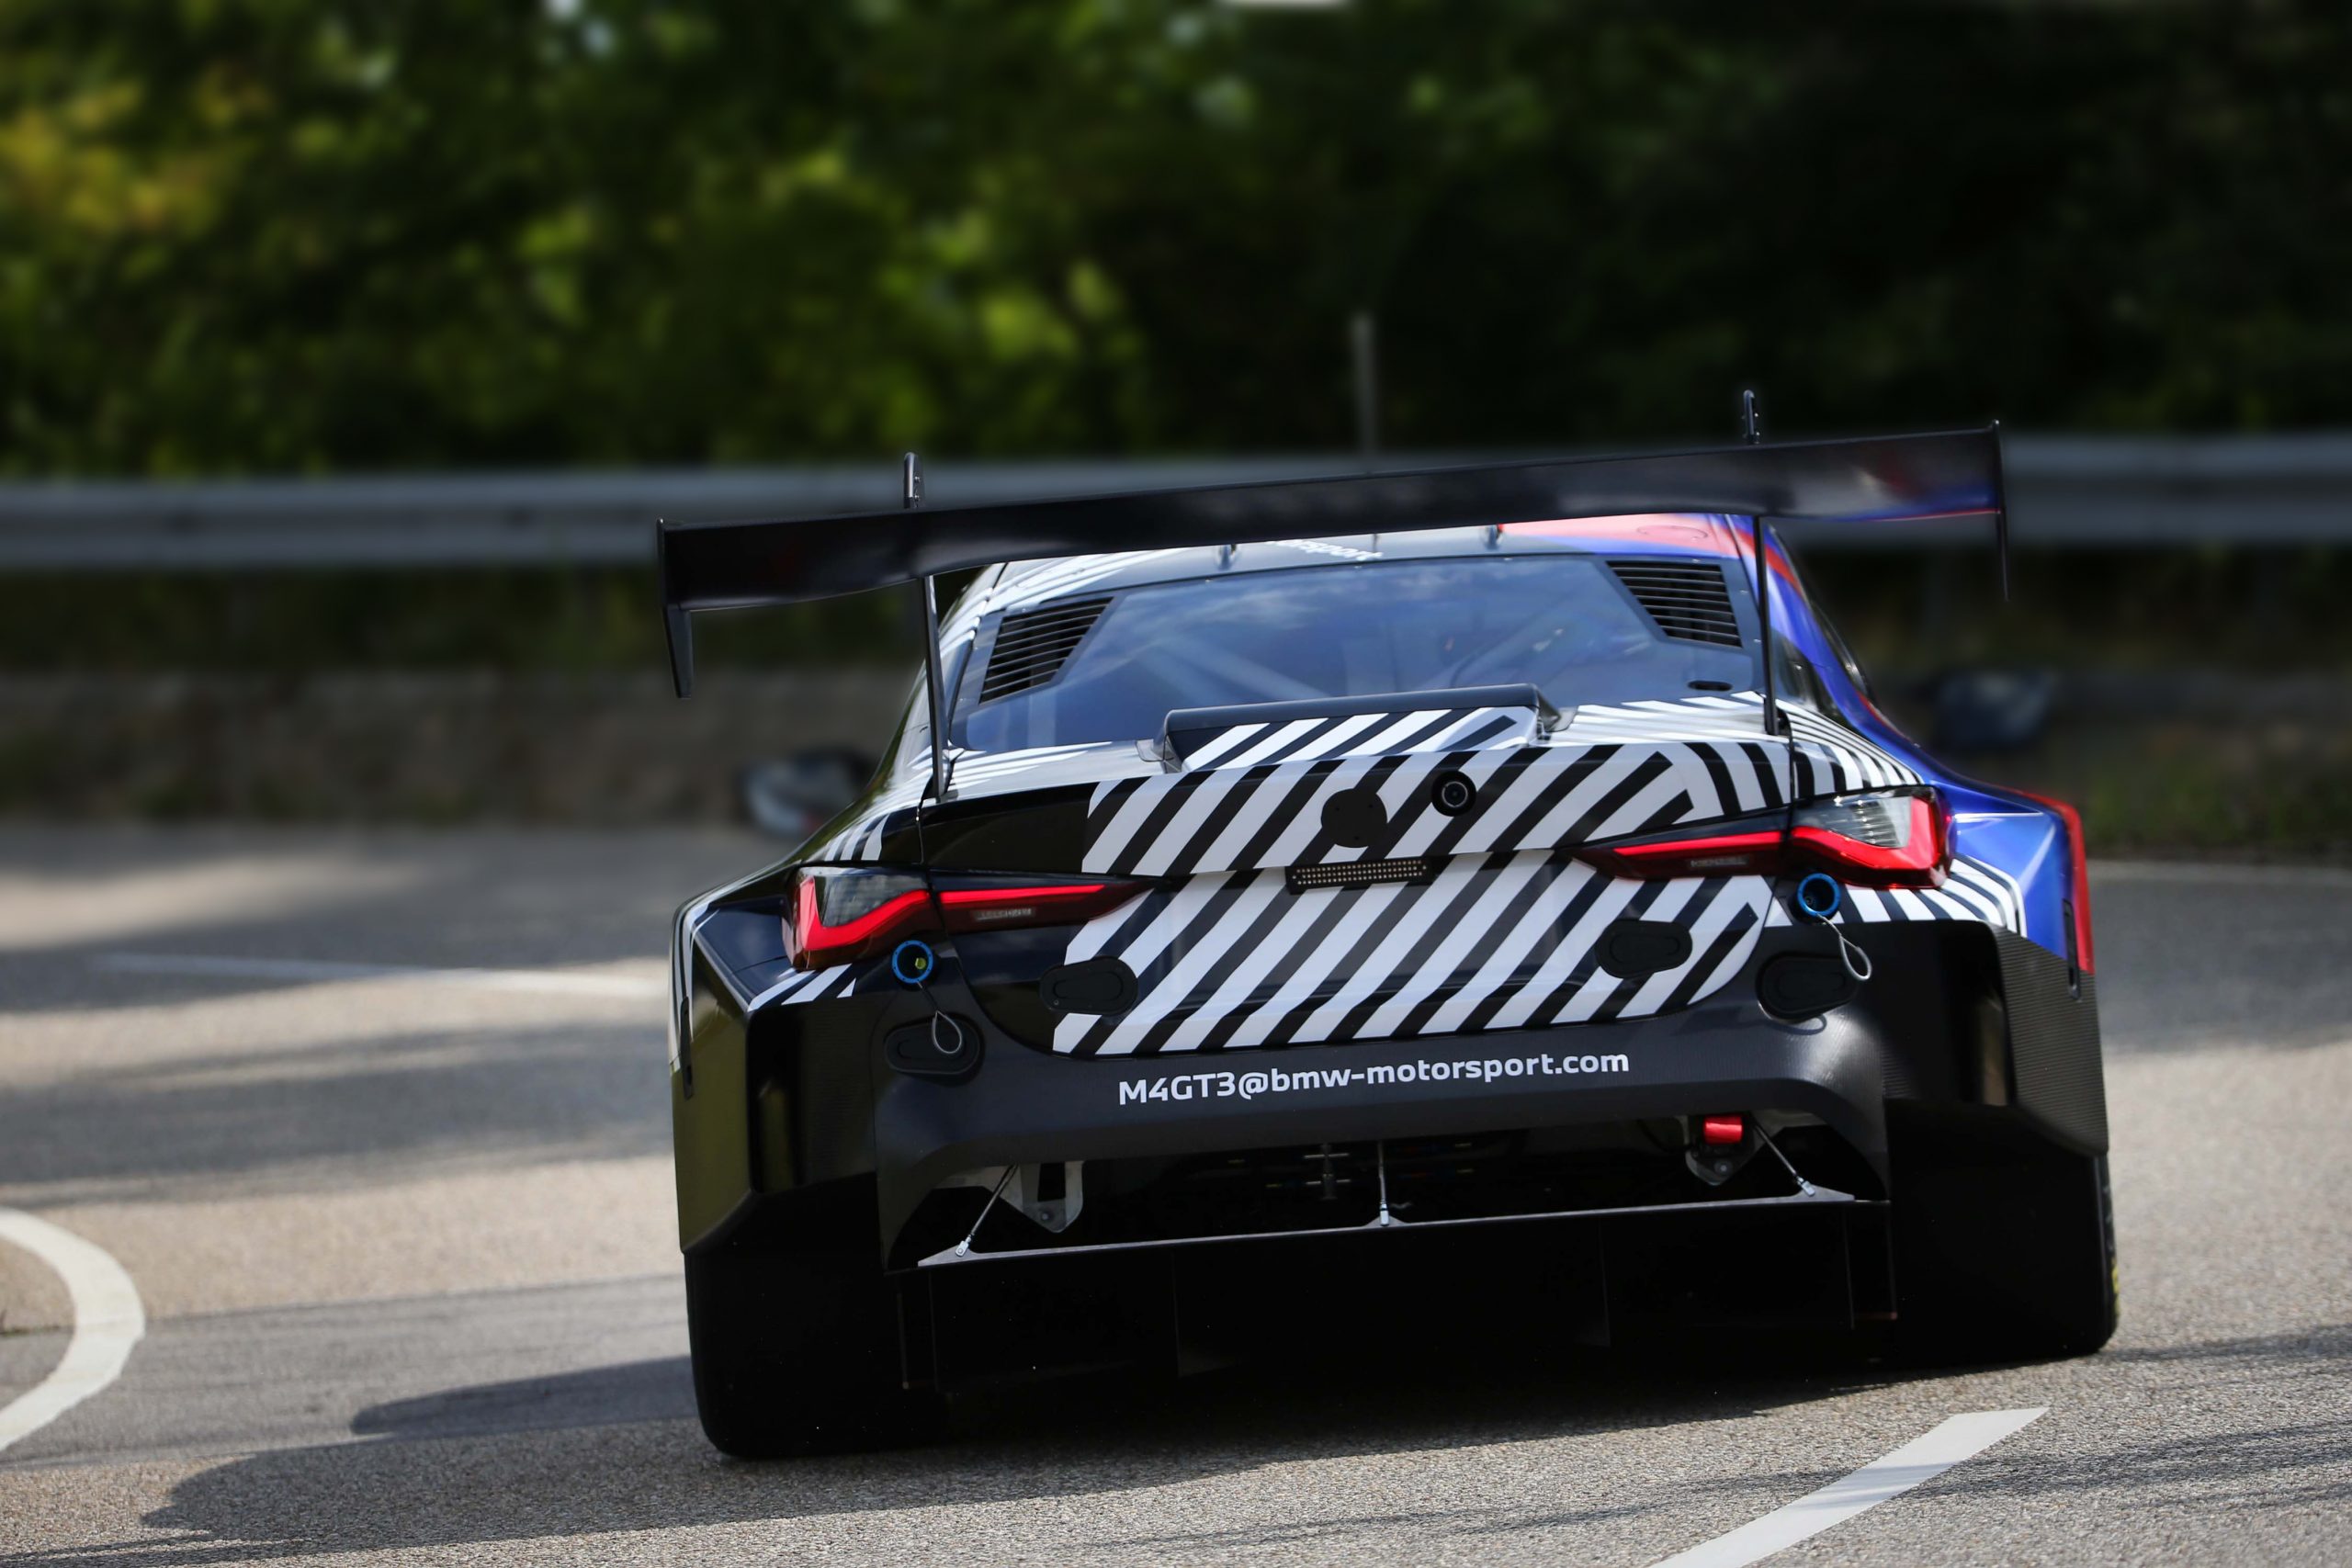 The BMW M4 GT3 breaks cover during a roll out test at Dingofing, Germany.